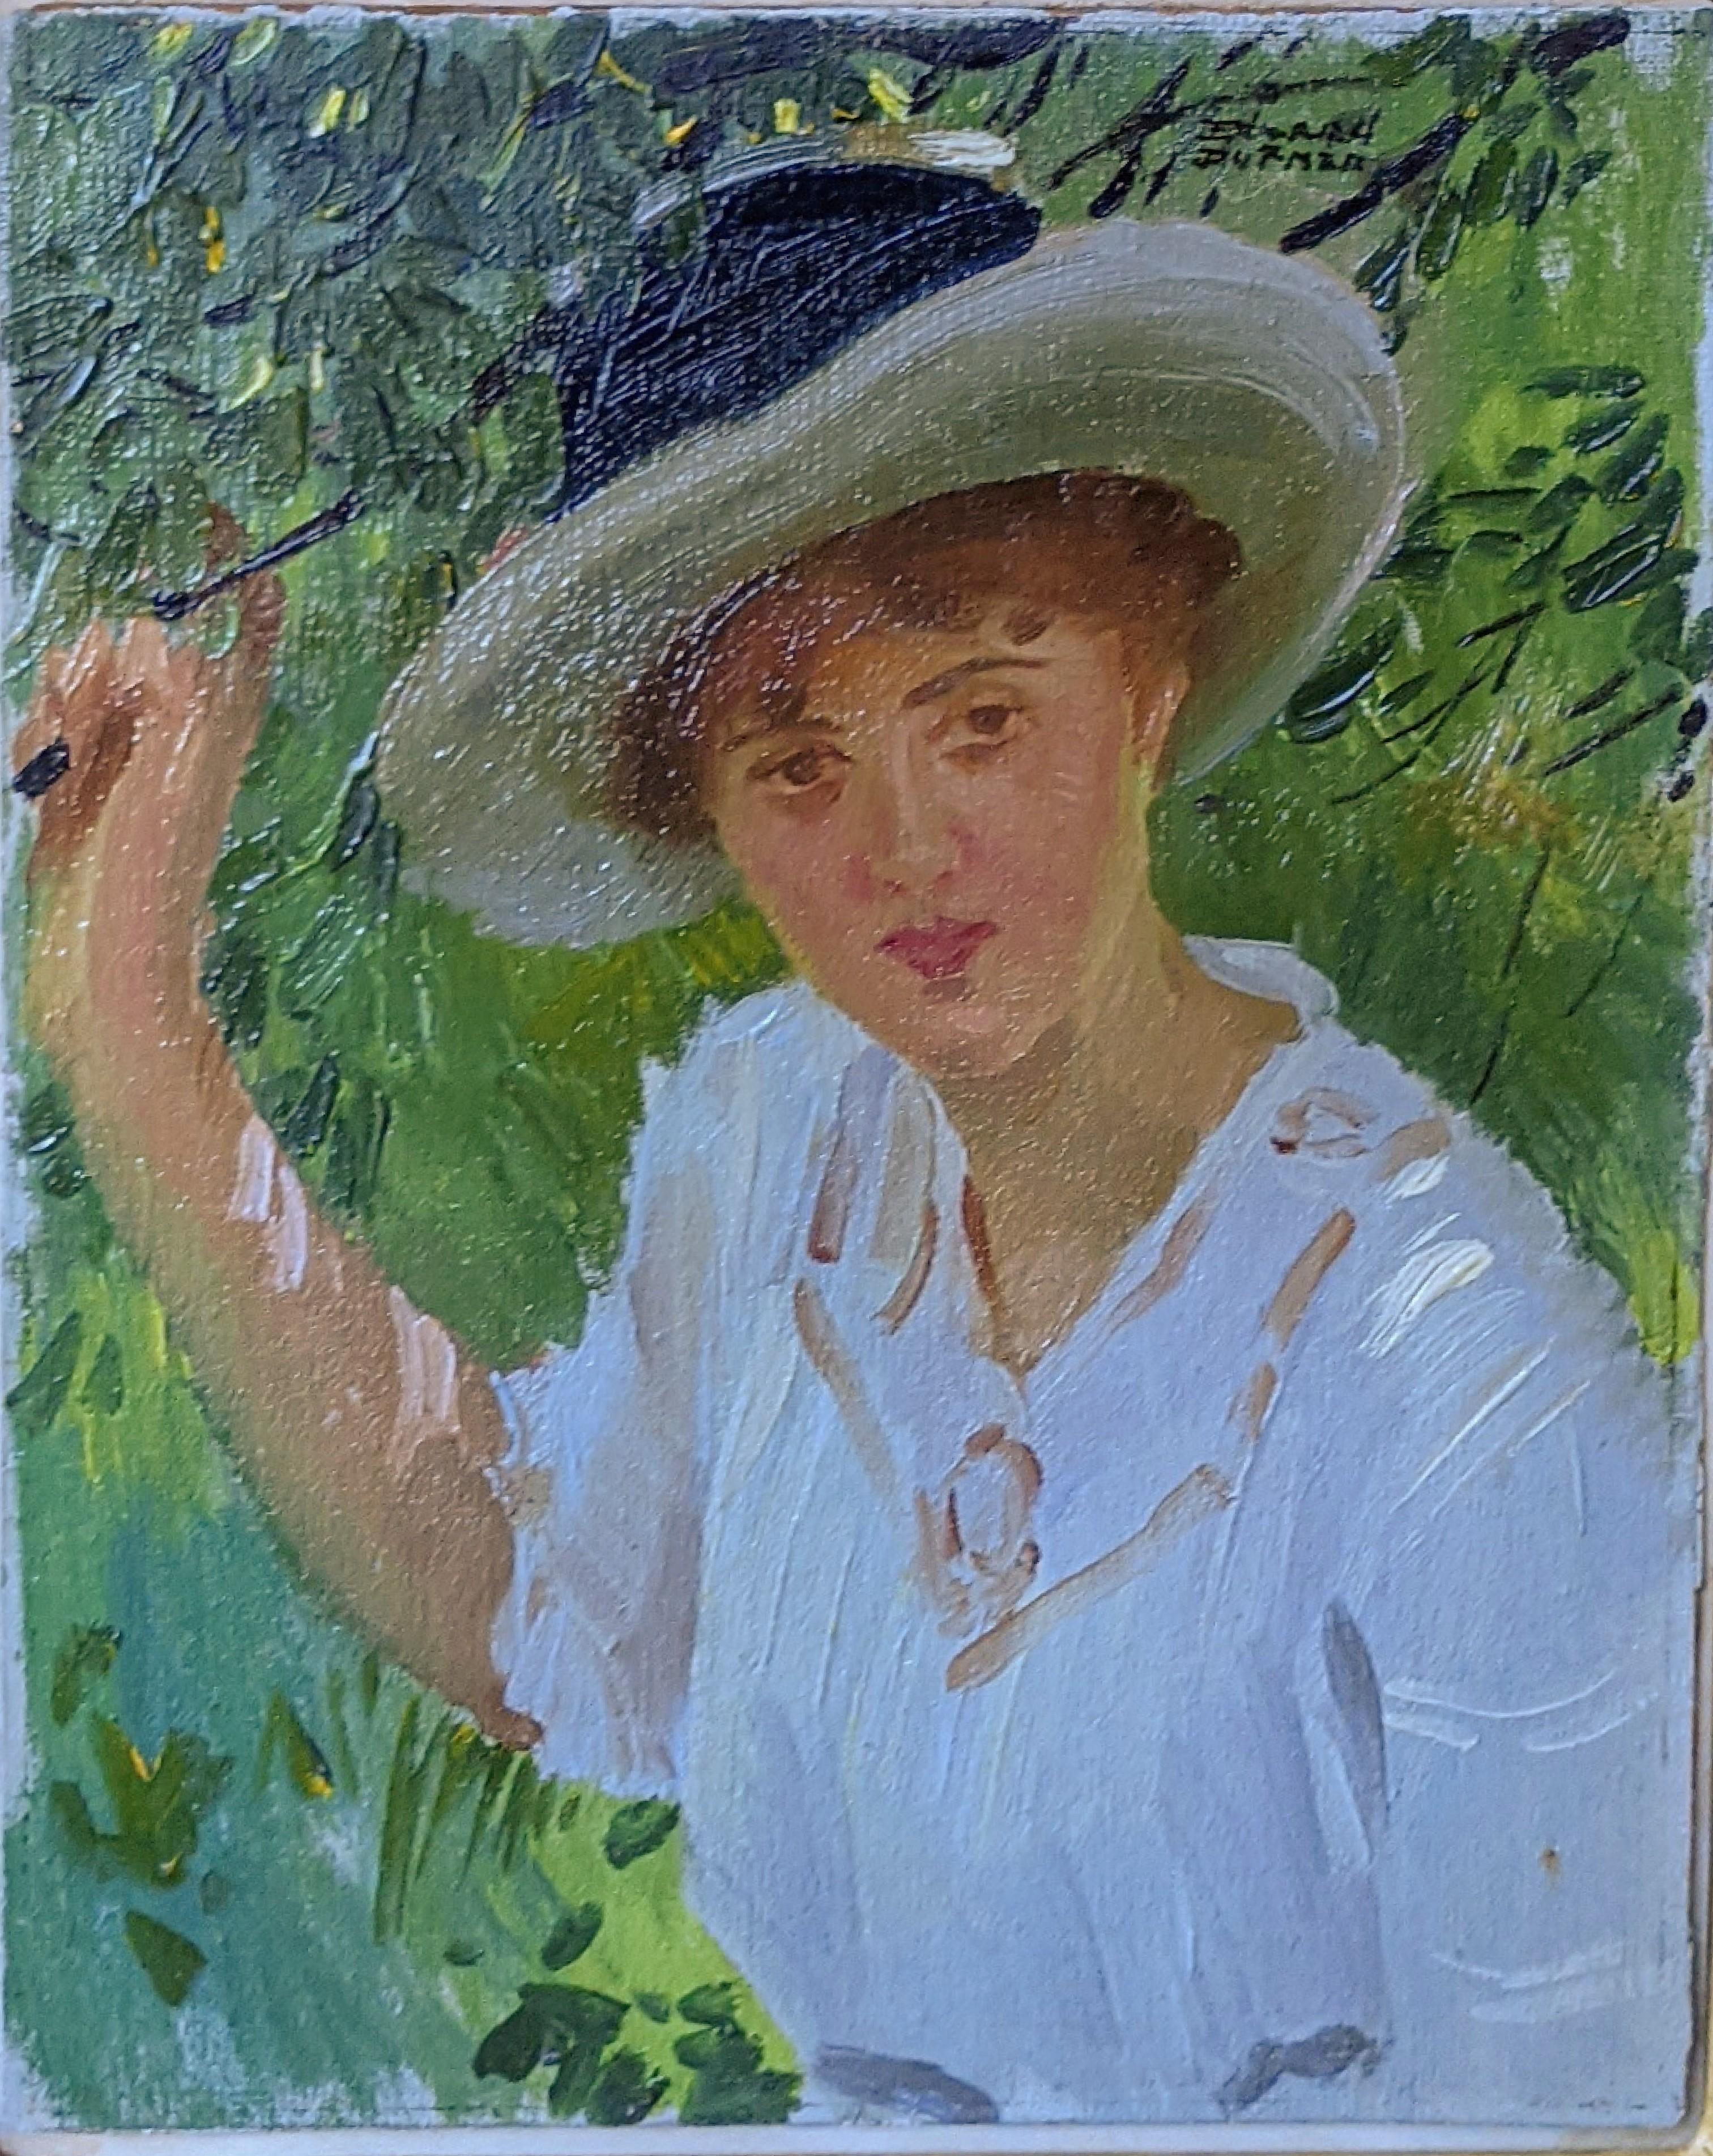 "Sunlight and Shade, " Edward Dufner, Lady with a Hat, American Impressionism